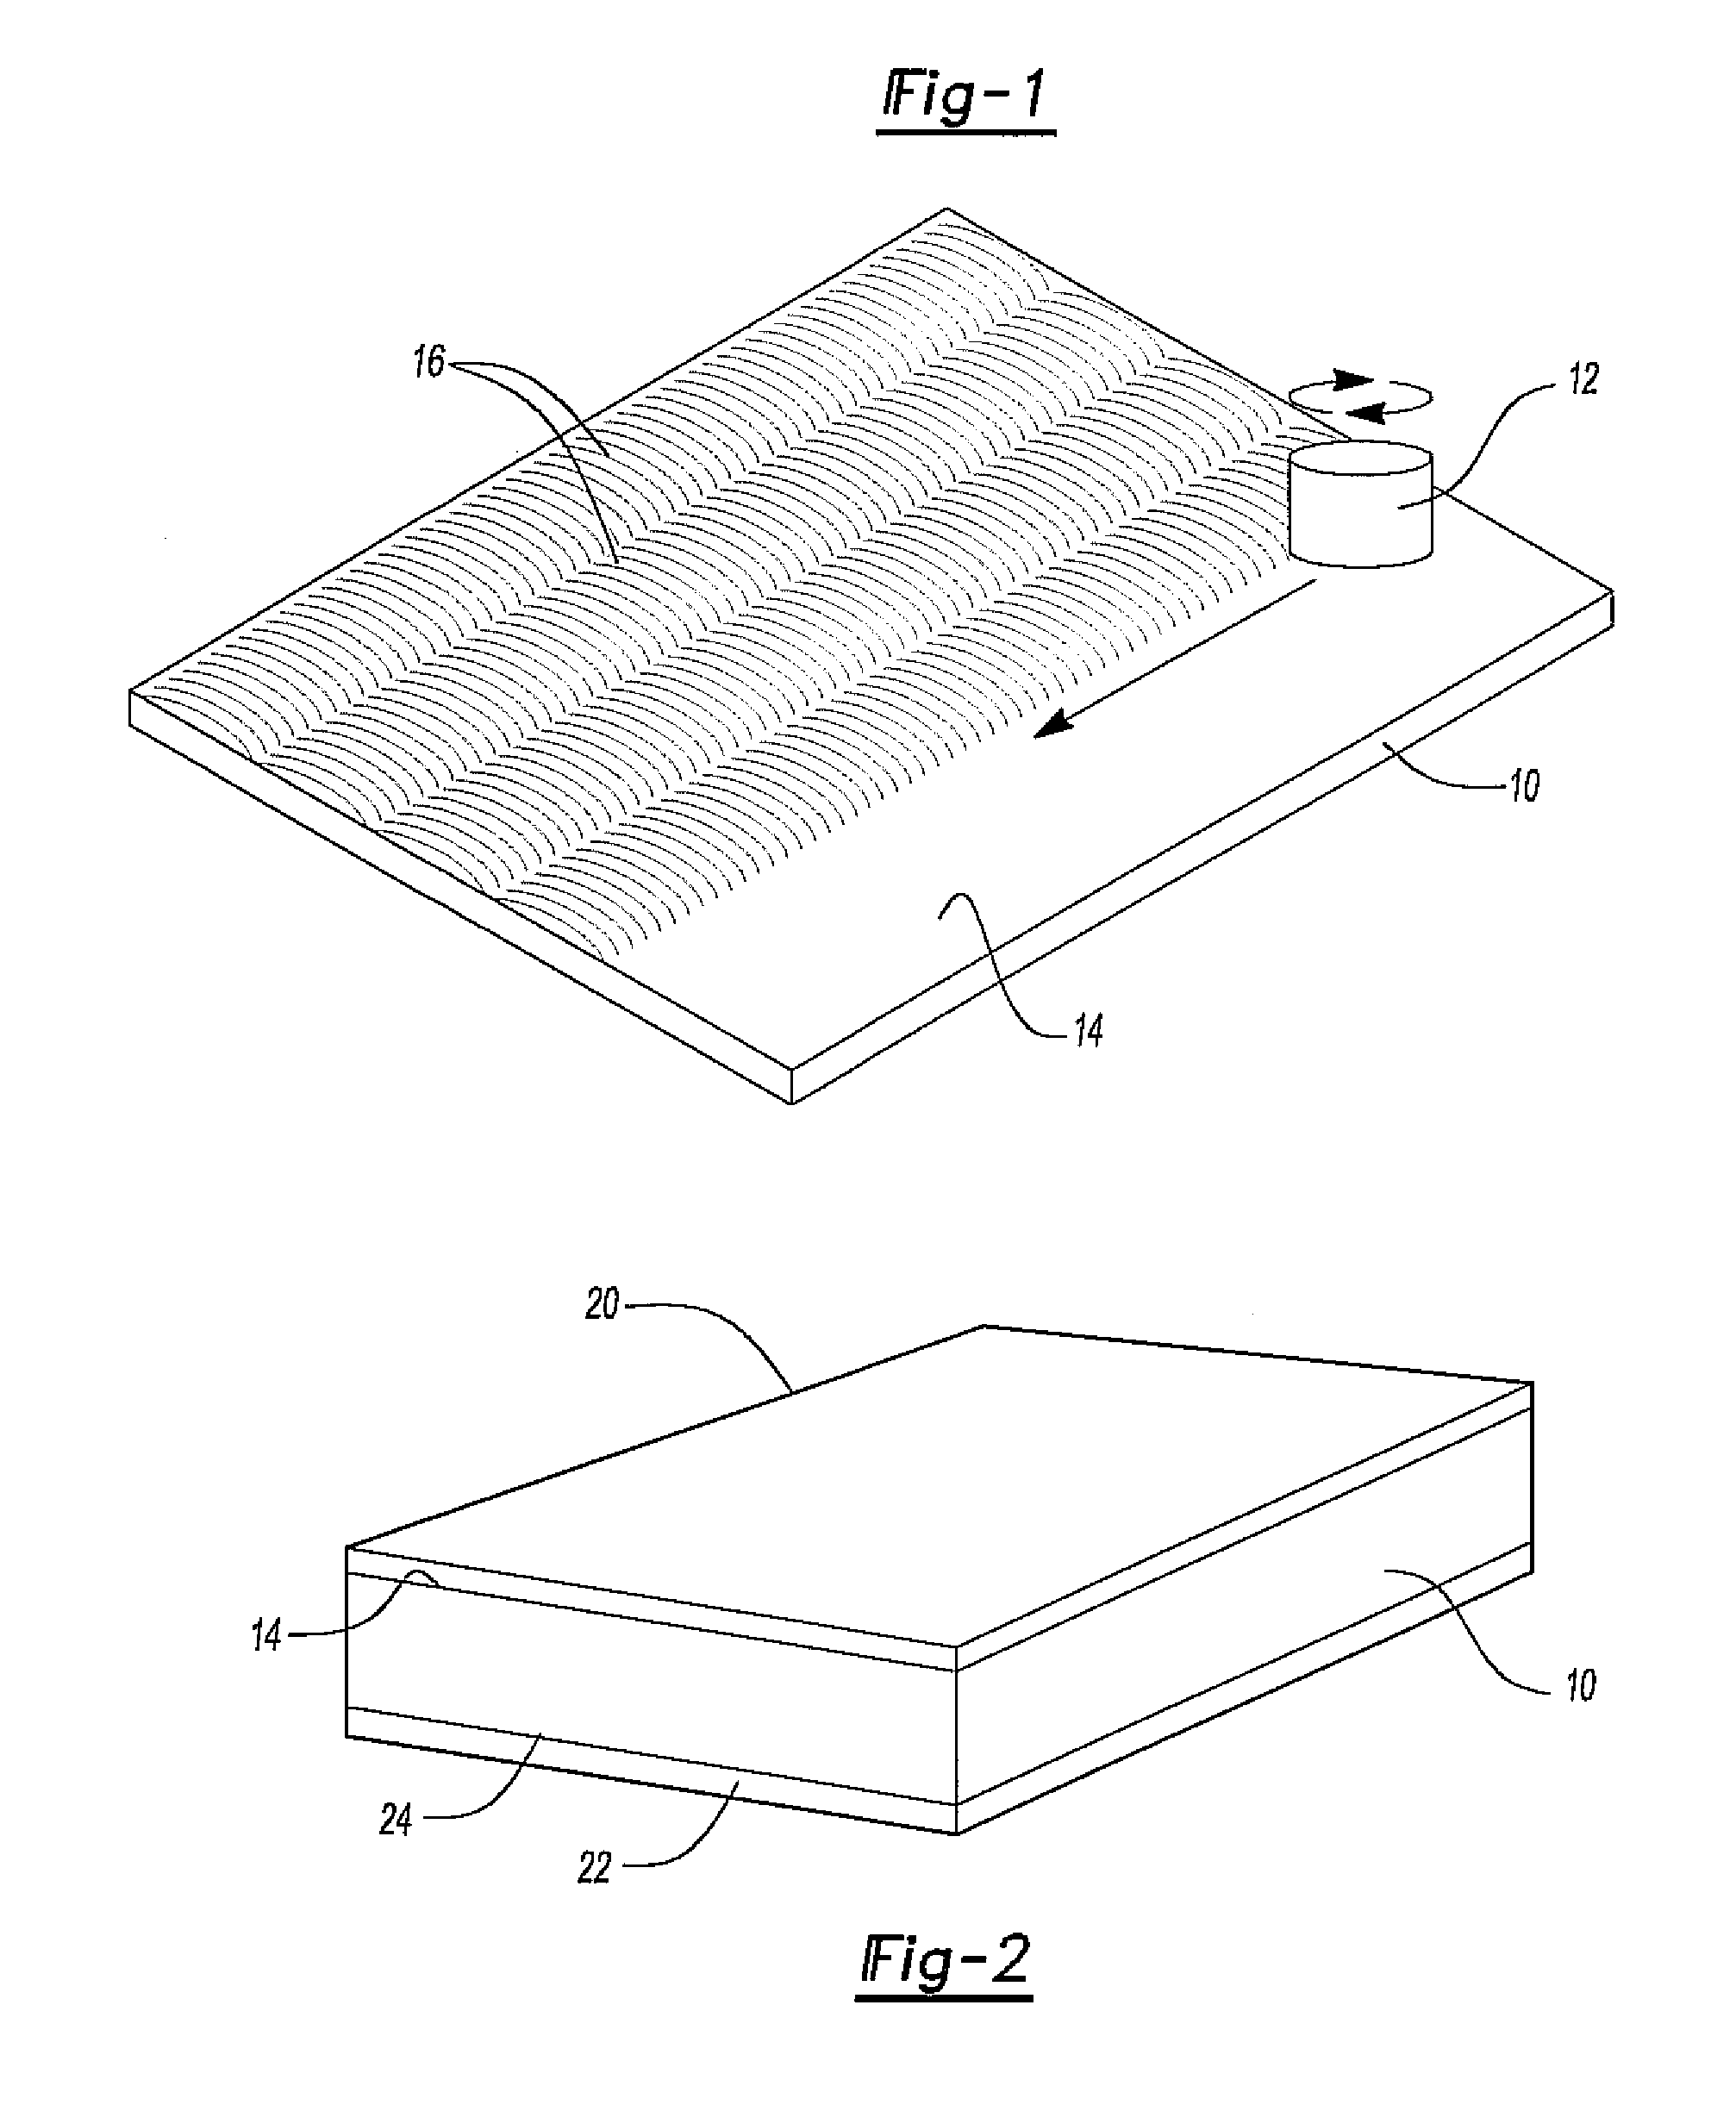 Method for developing fine grained, thermally stable metallic material